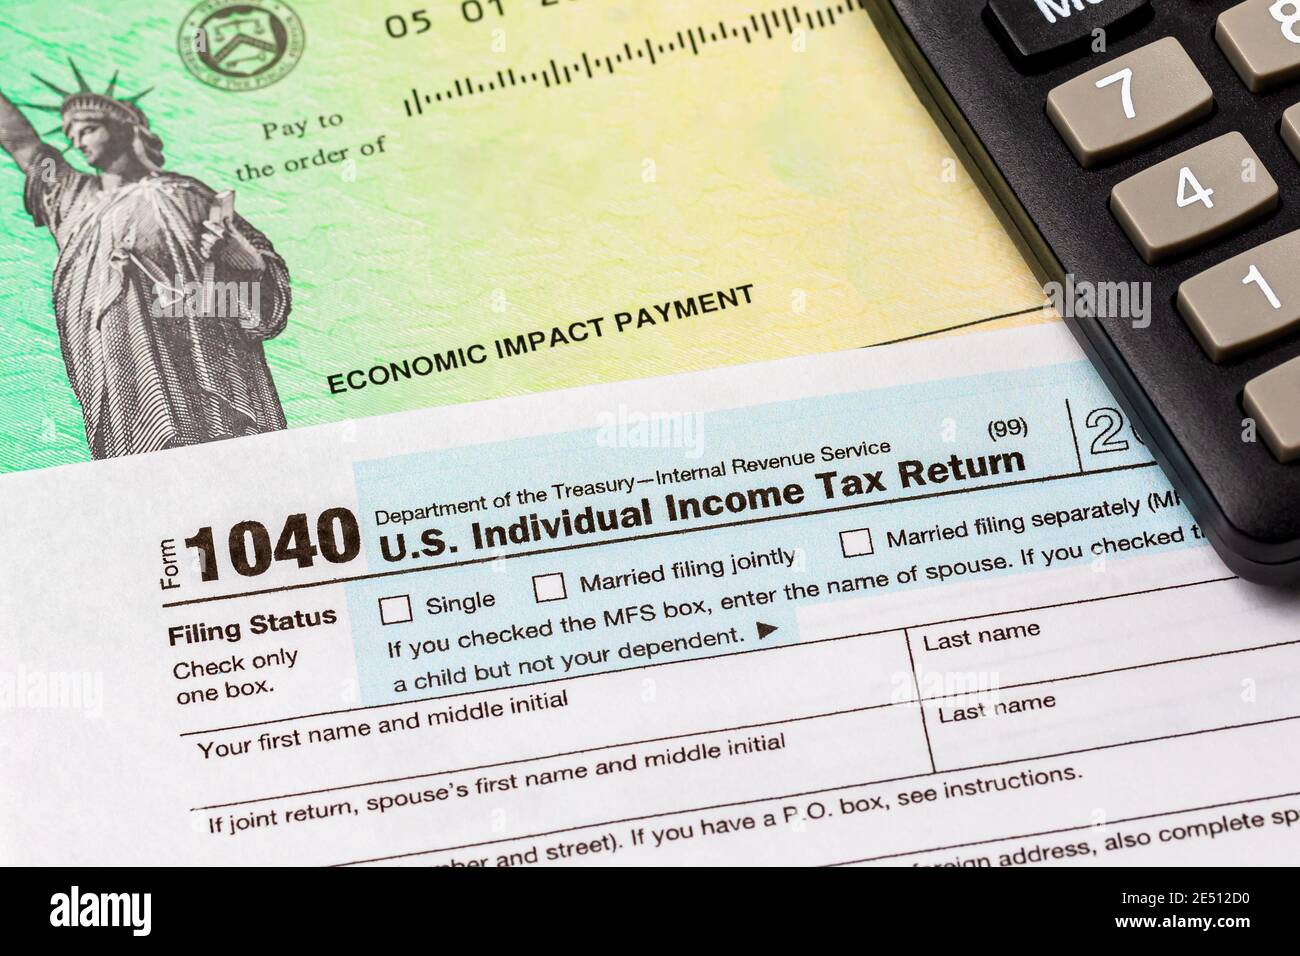 1040 individual income tax return form and economic impact payment or stimulus check. Concept of filing taxes, taxable income and tax information. Stock Photo